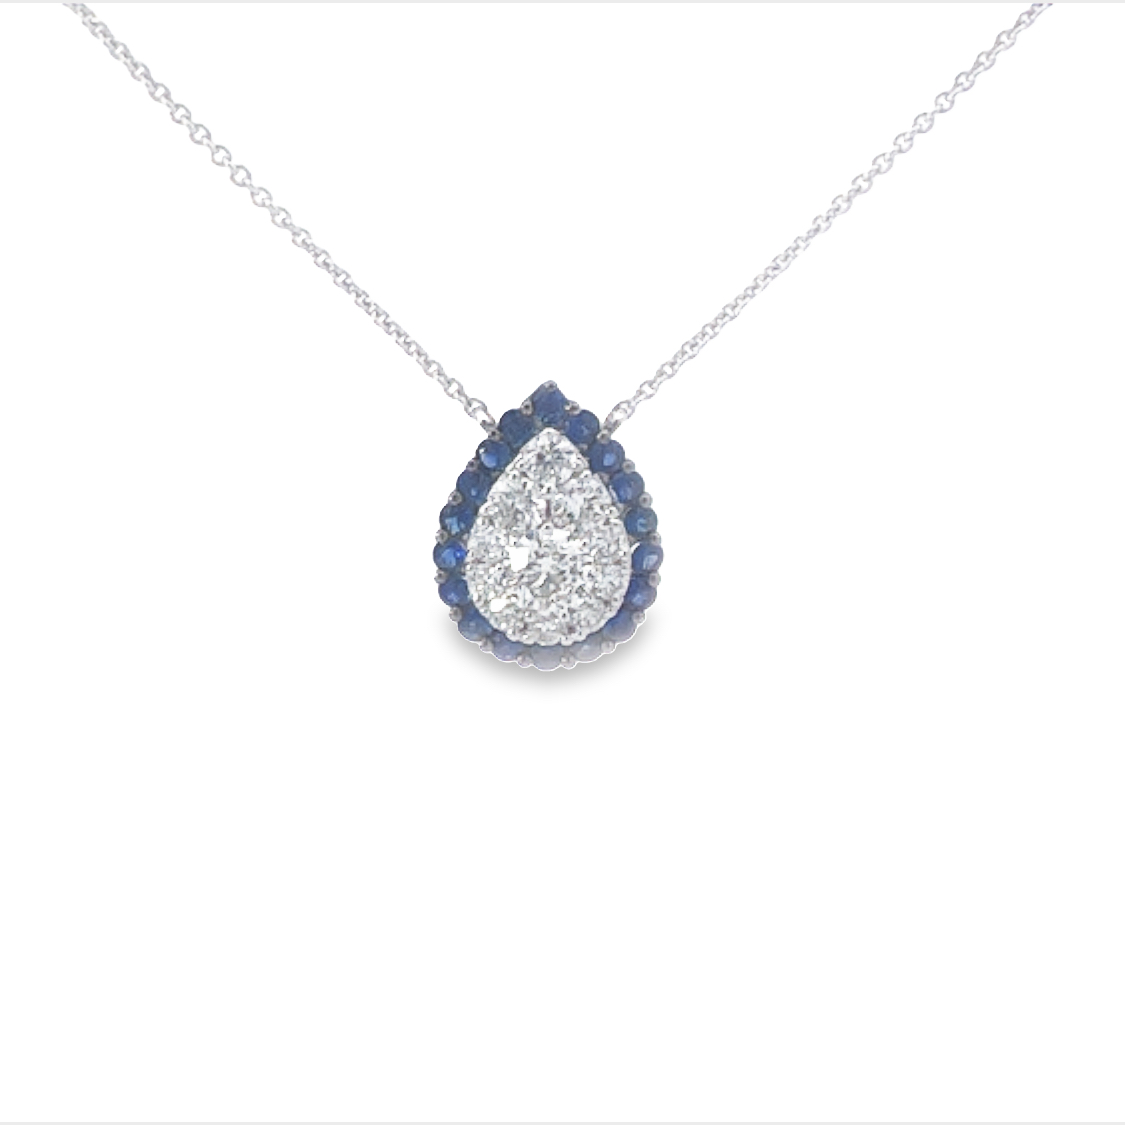 14K White Gold Diamond and Sapphire Necklace